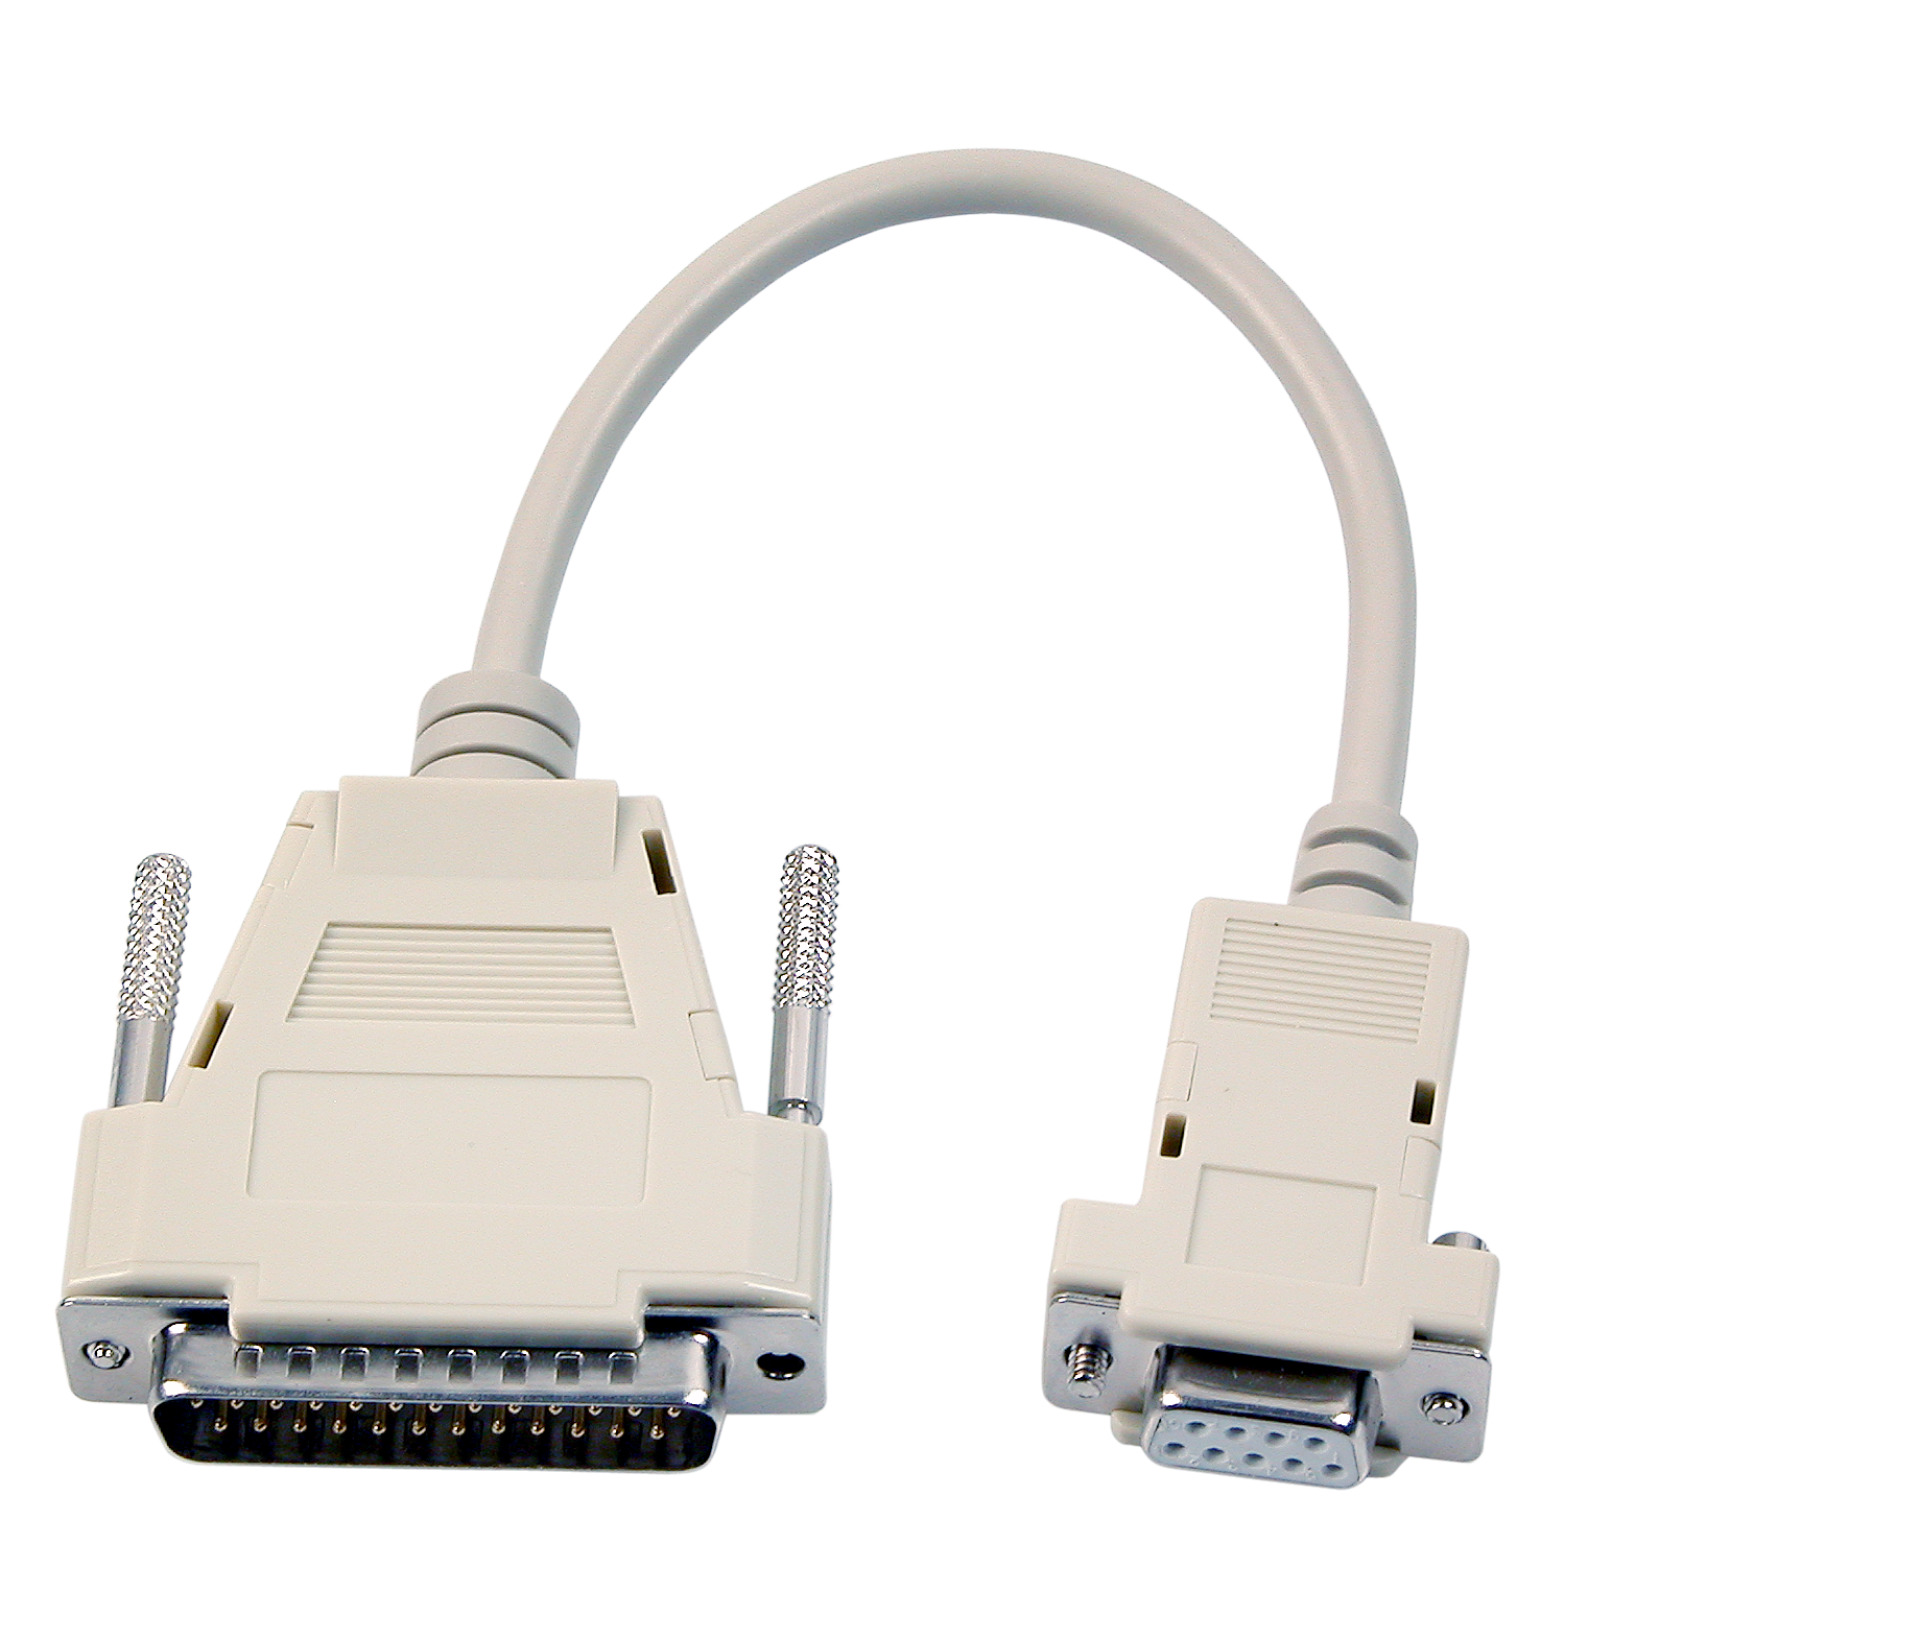 Mouse-Modem Adapter Cable, DSub 9 to DSub 25, F-M, 3,0m, beige  